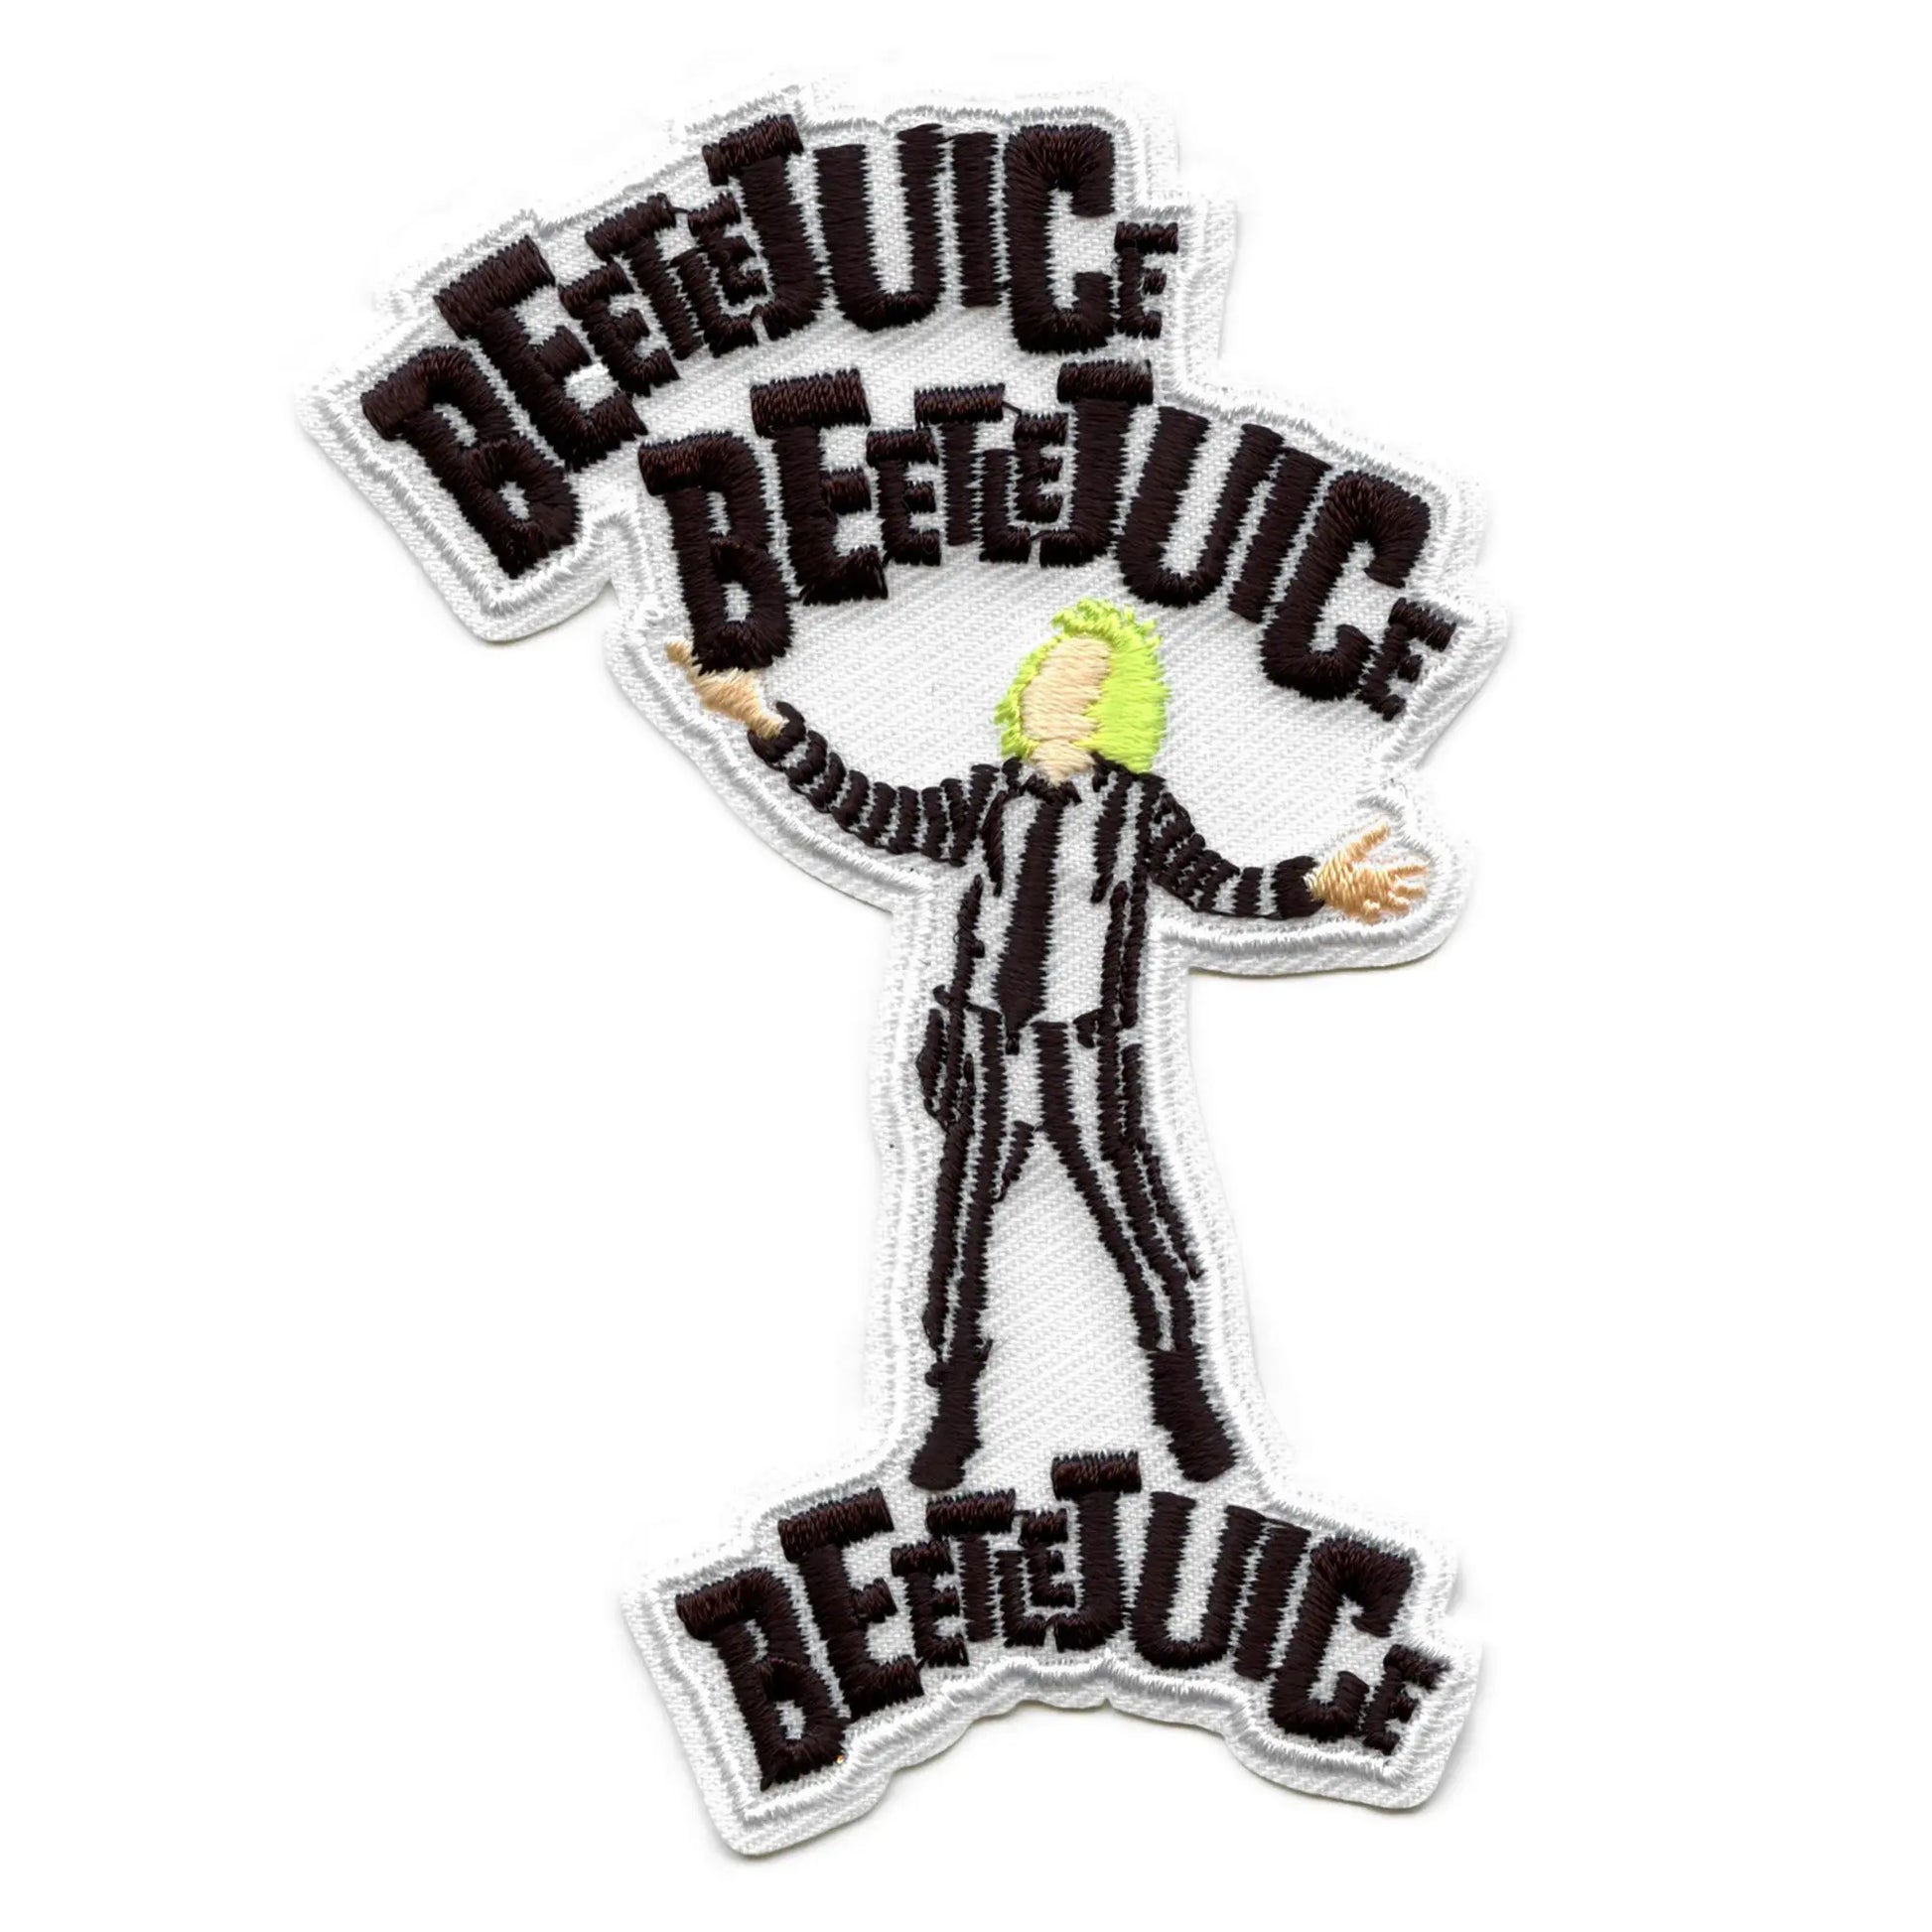 Beetlejuice Beetlejuice Beetlejuice Standing Patch Classic Movie Embroidered Iron On